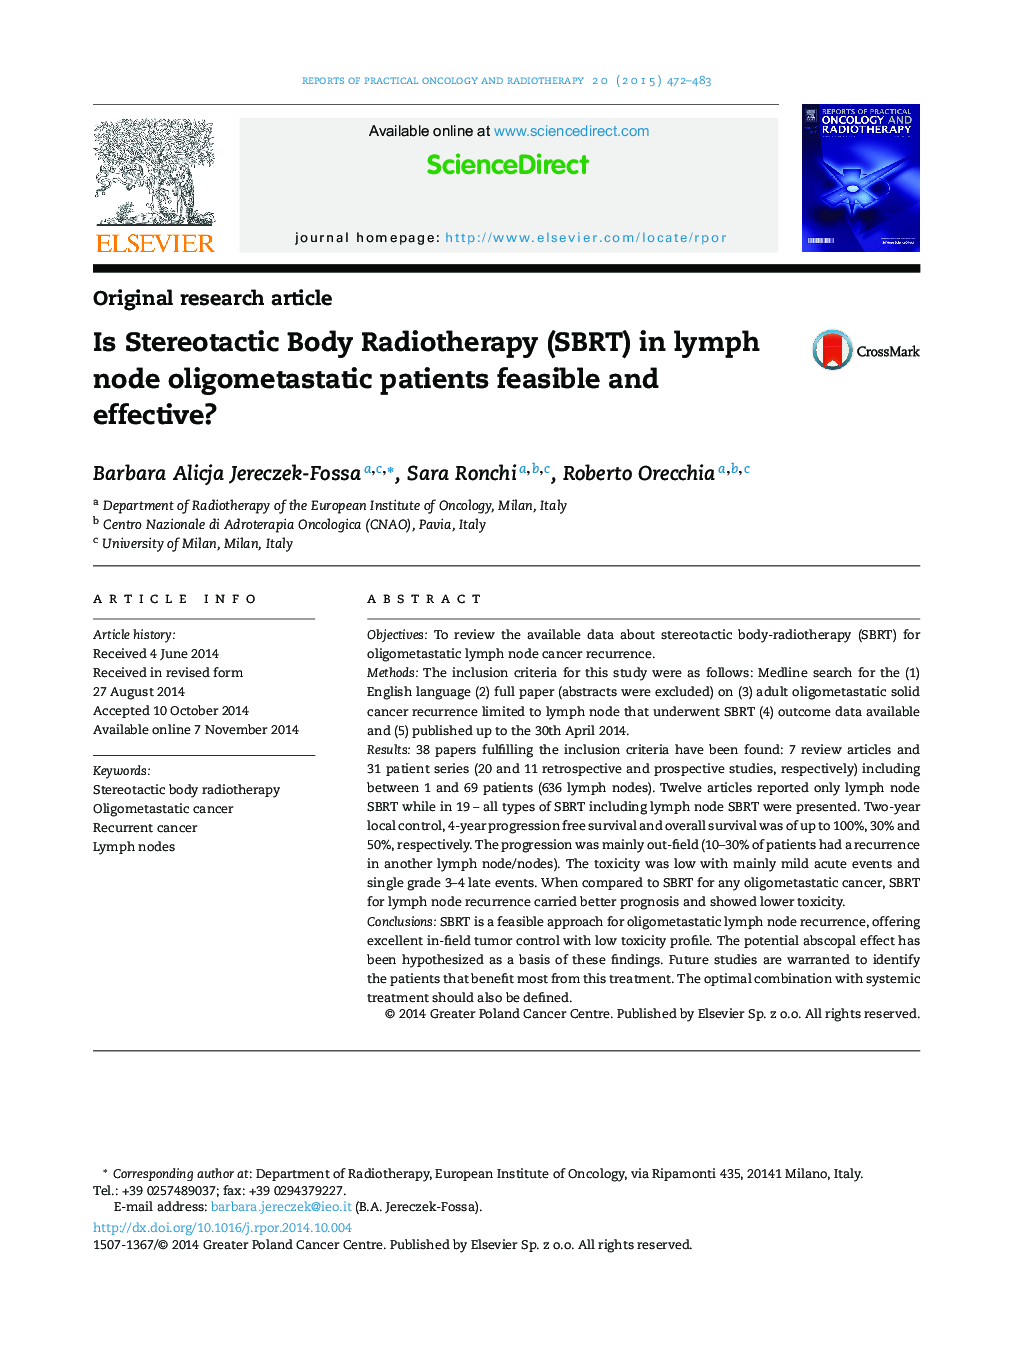 Is Stereotactic Body Radiotherapy (SBRT) in lymph node oligometastatic patients feasible and effective?